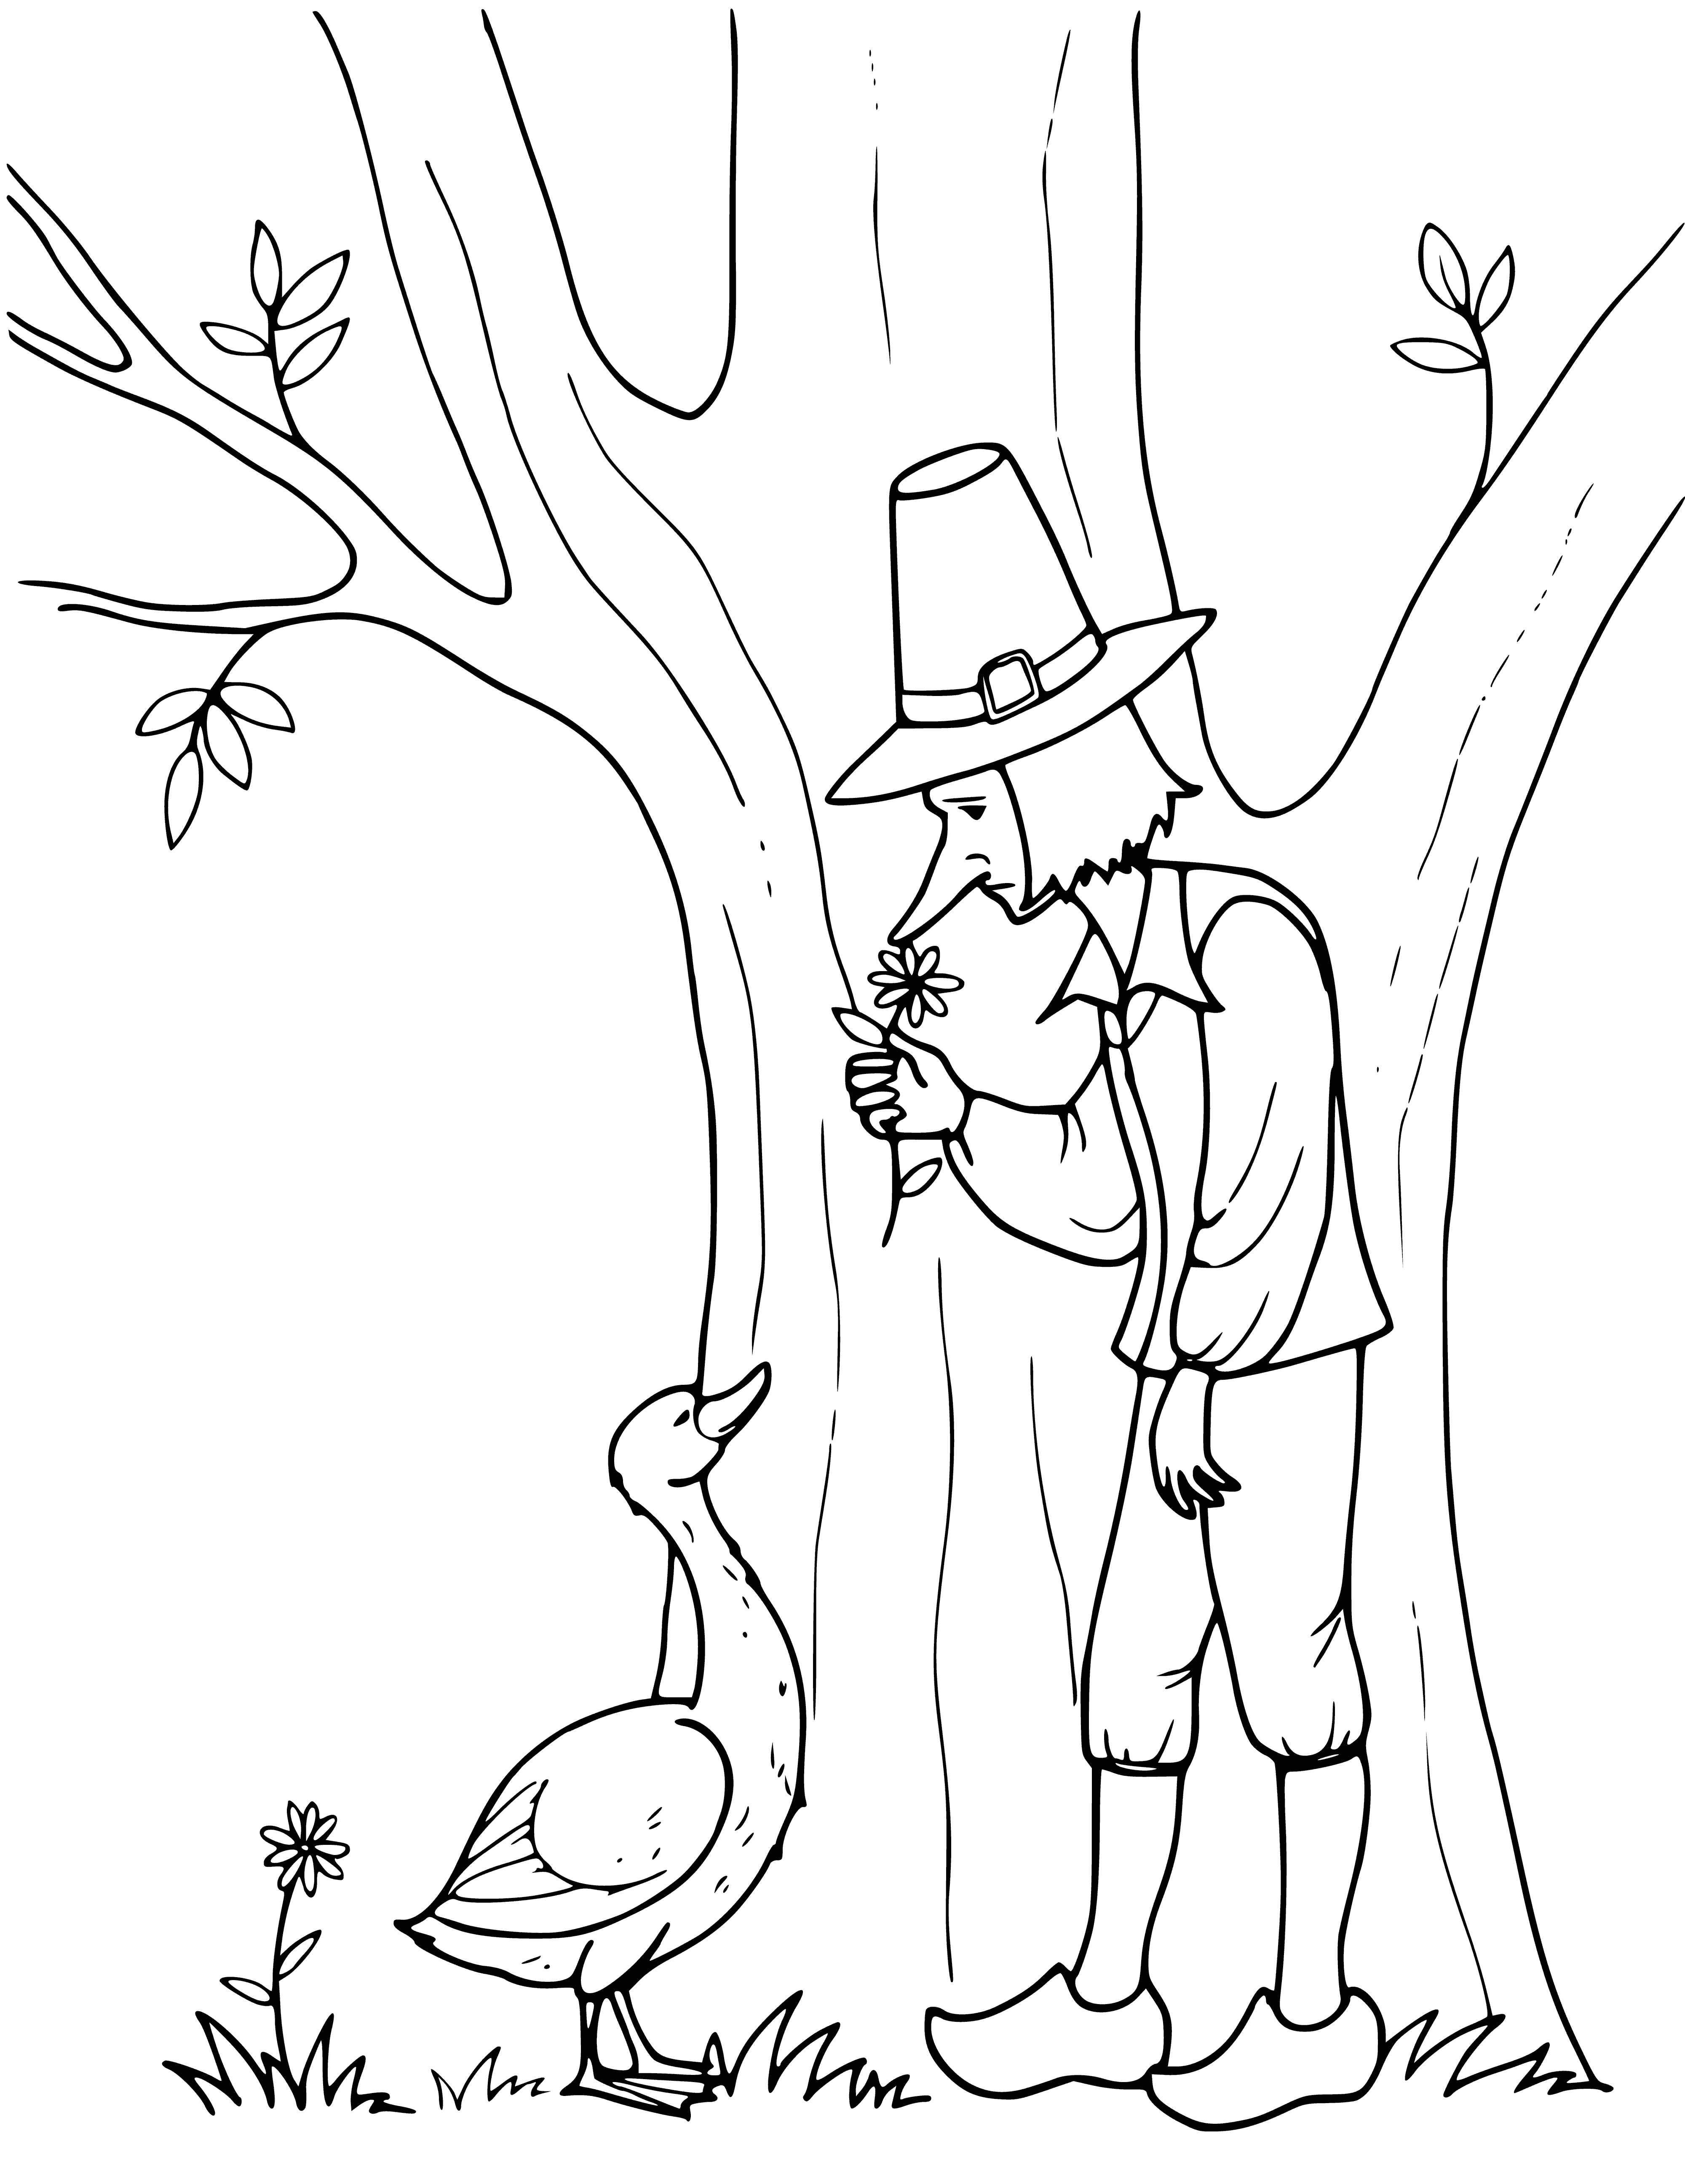 Jacob and the goose Mimi coloring page